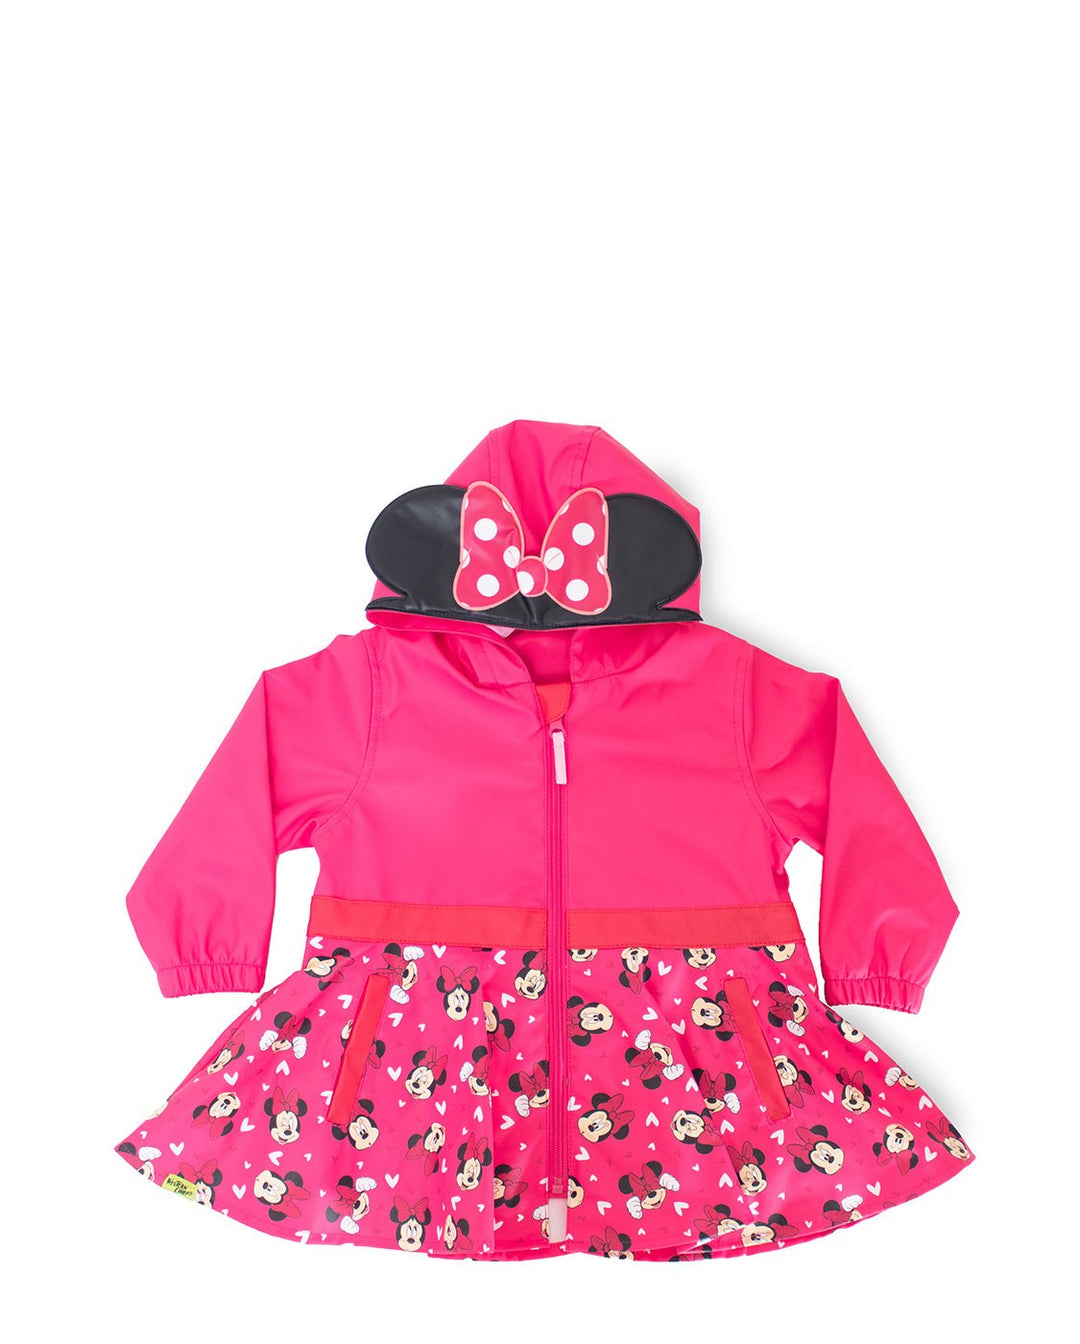 Kids Minnie Mouse Love Raincoat - Pink - Western Chief